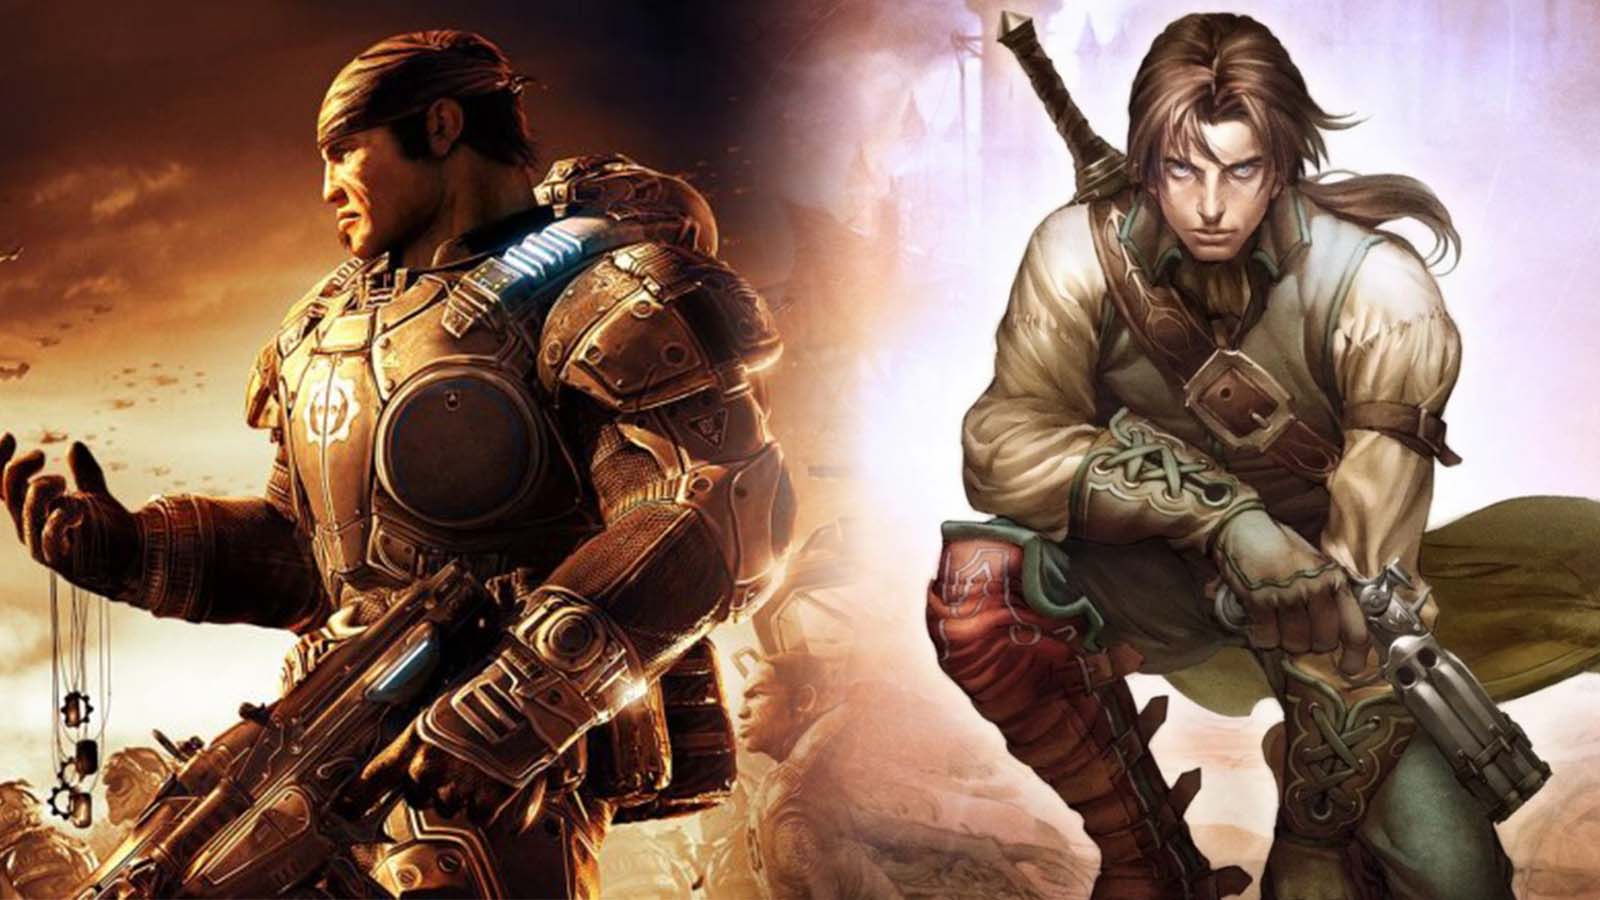 Marcus Fenix and Fable character